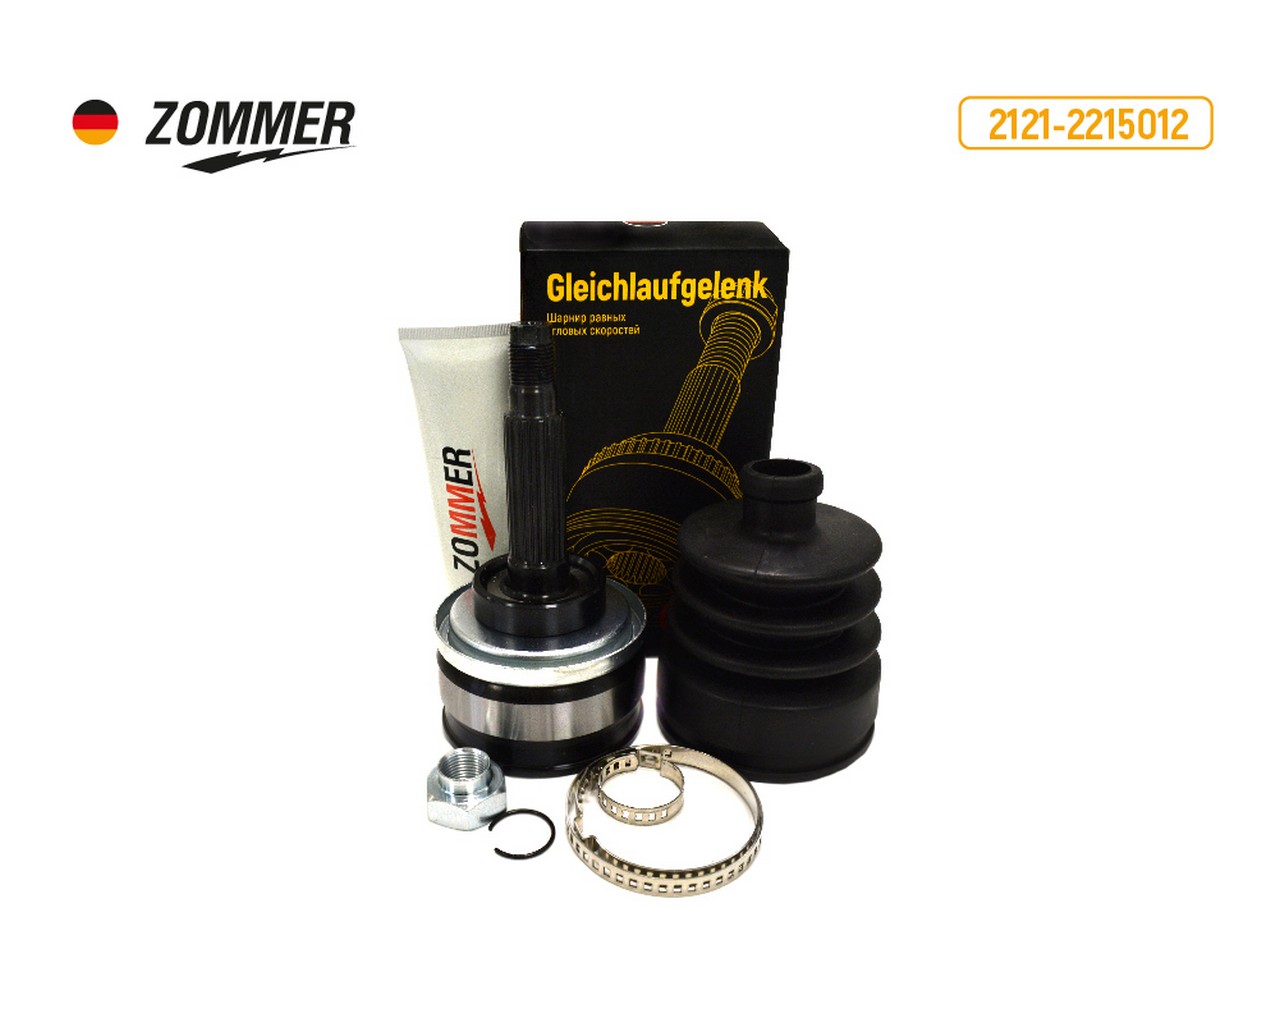 Zommer 1410887a